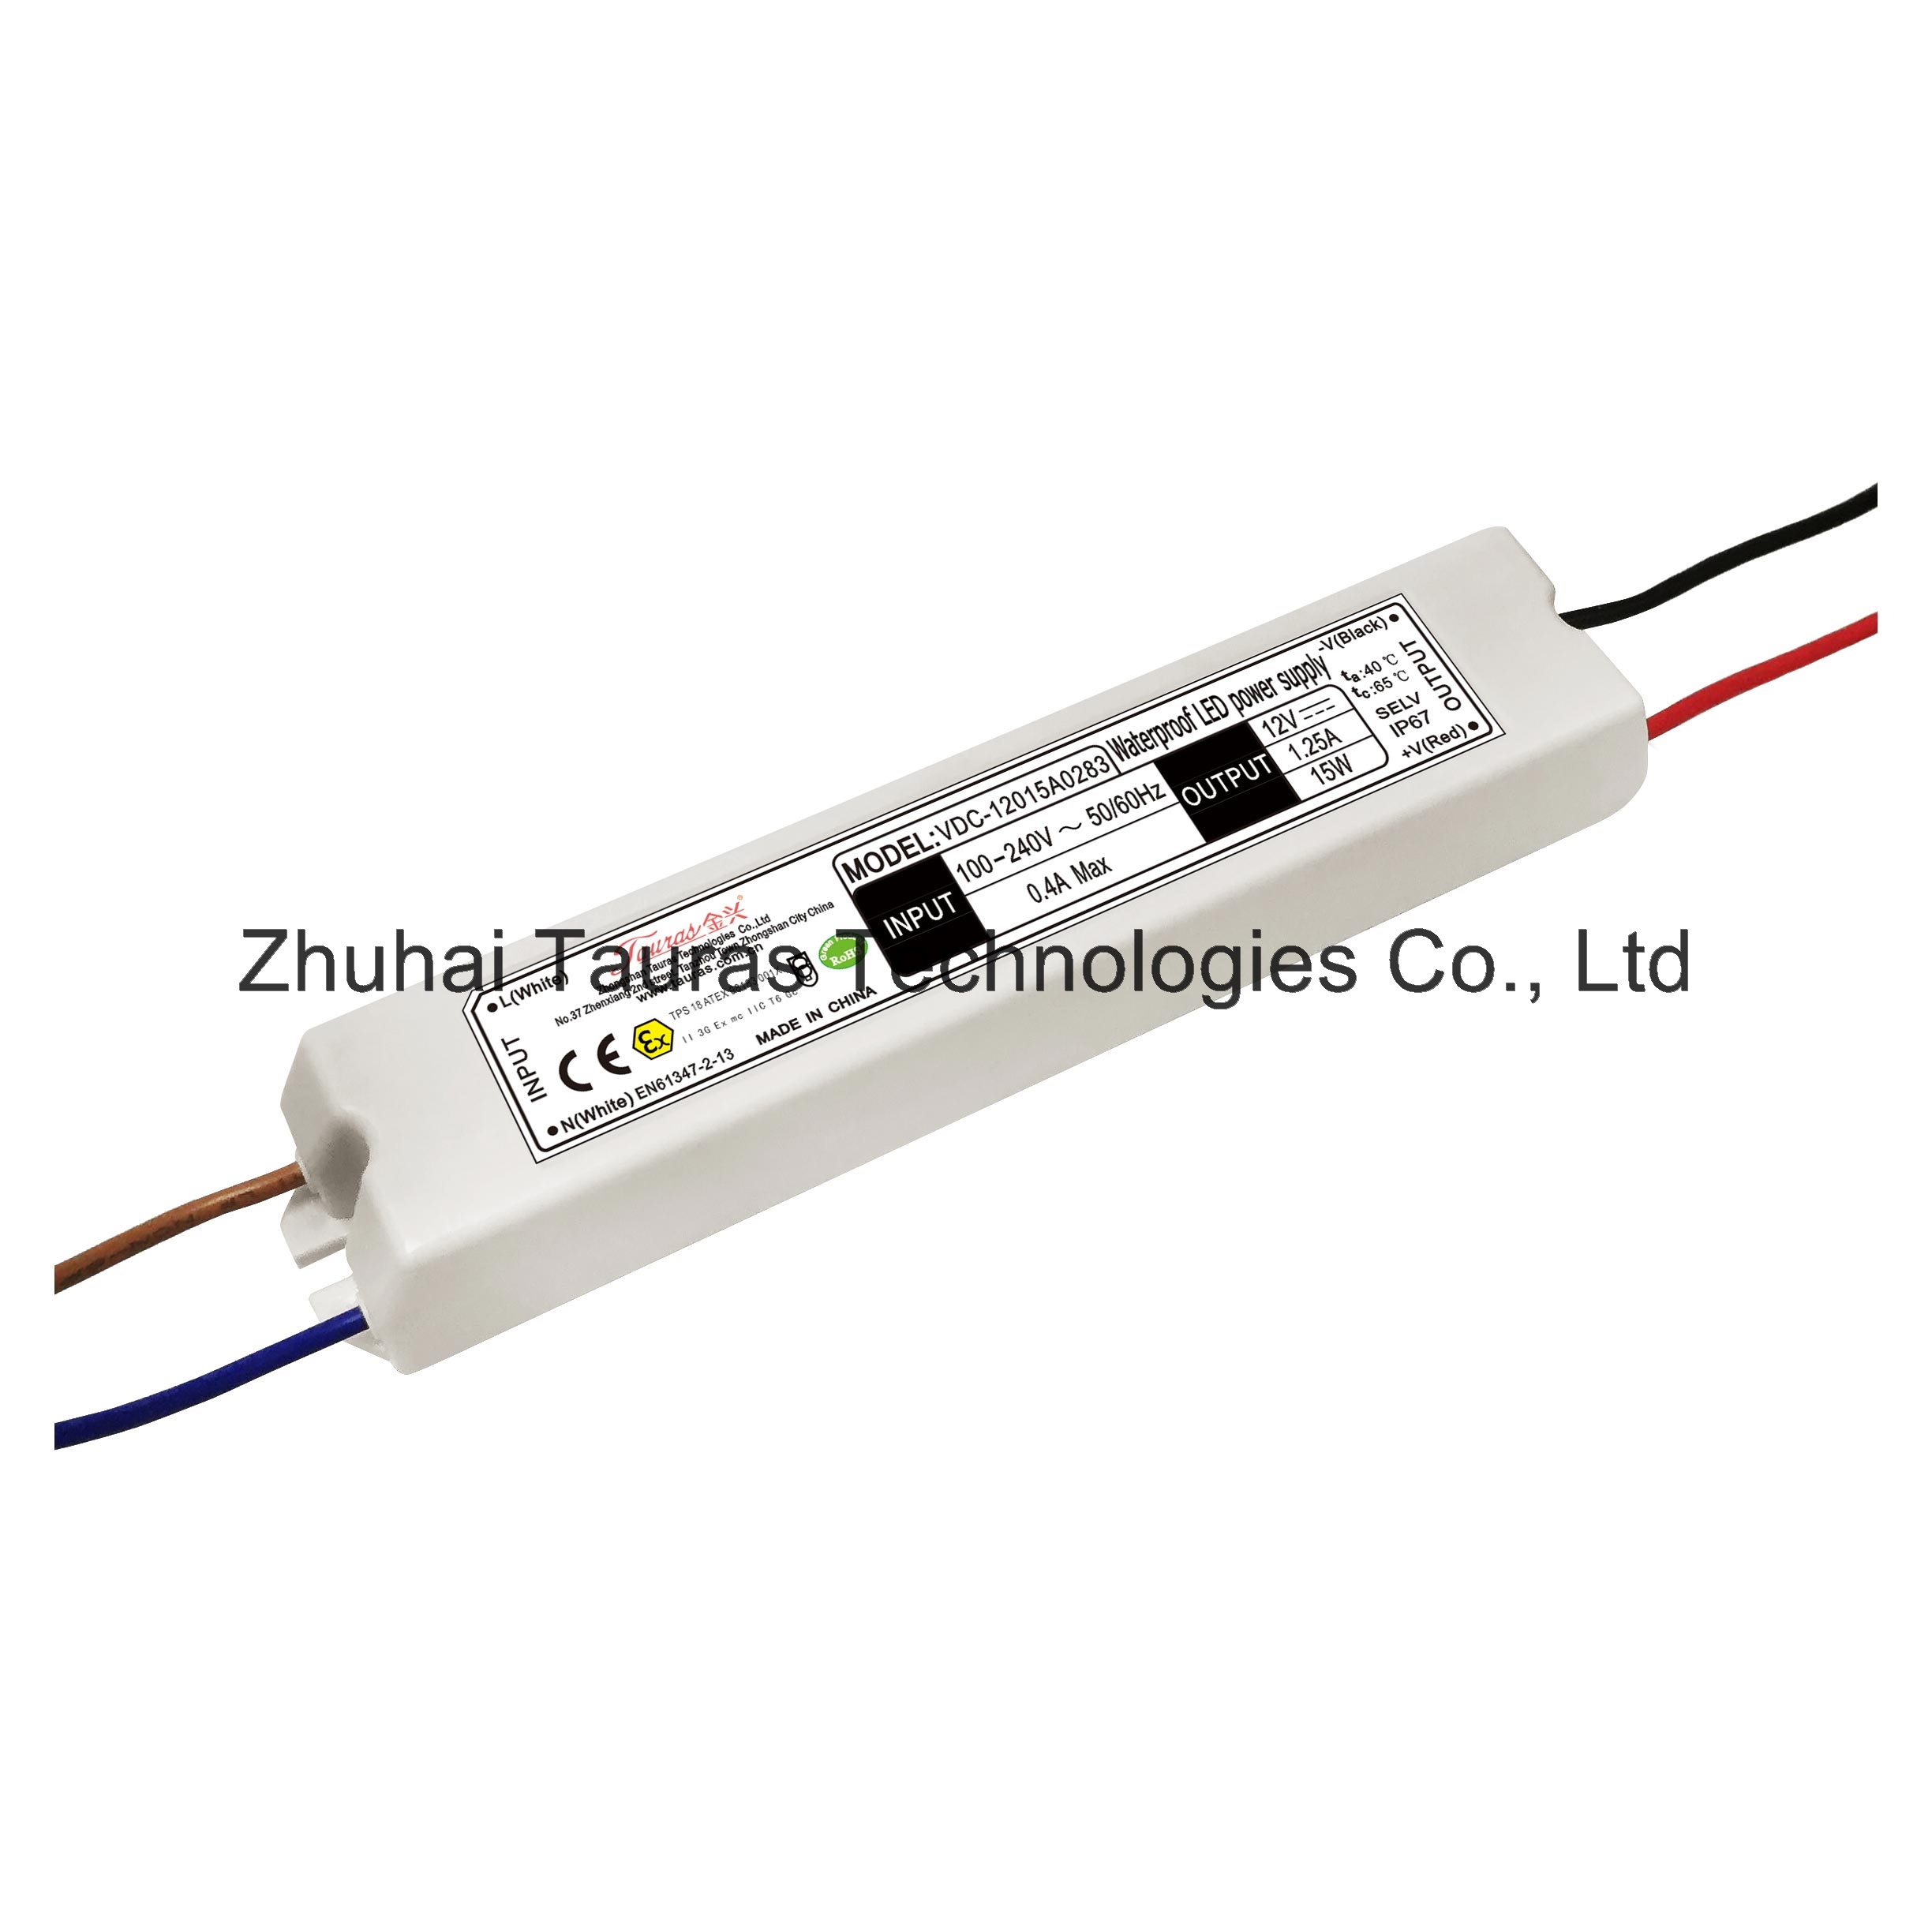 Constant Voltage 12Vdc 15W Power Supply for LED Lighting VDC-12015A0283